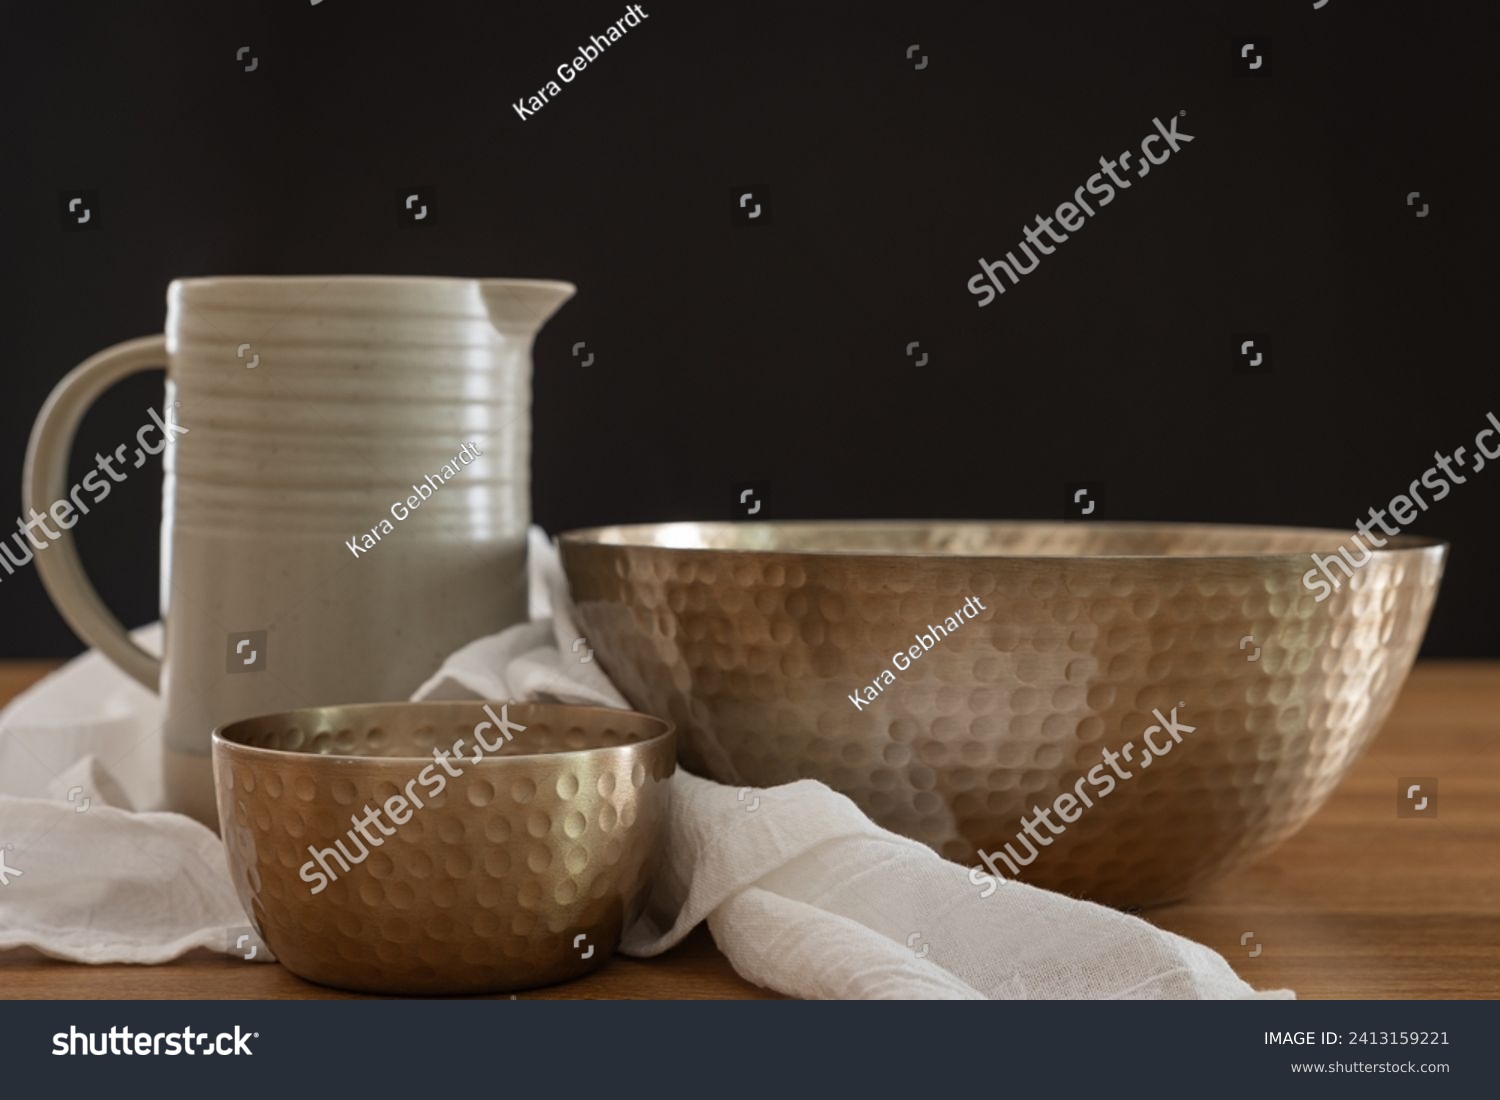 Clay pitcher, two copper bowls and white linen with a black background and copy space #2413159221